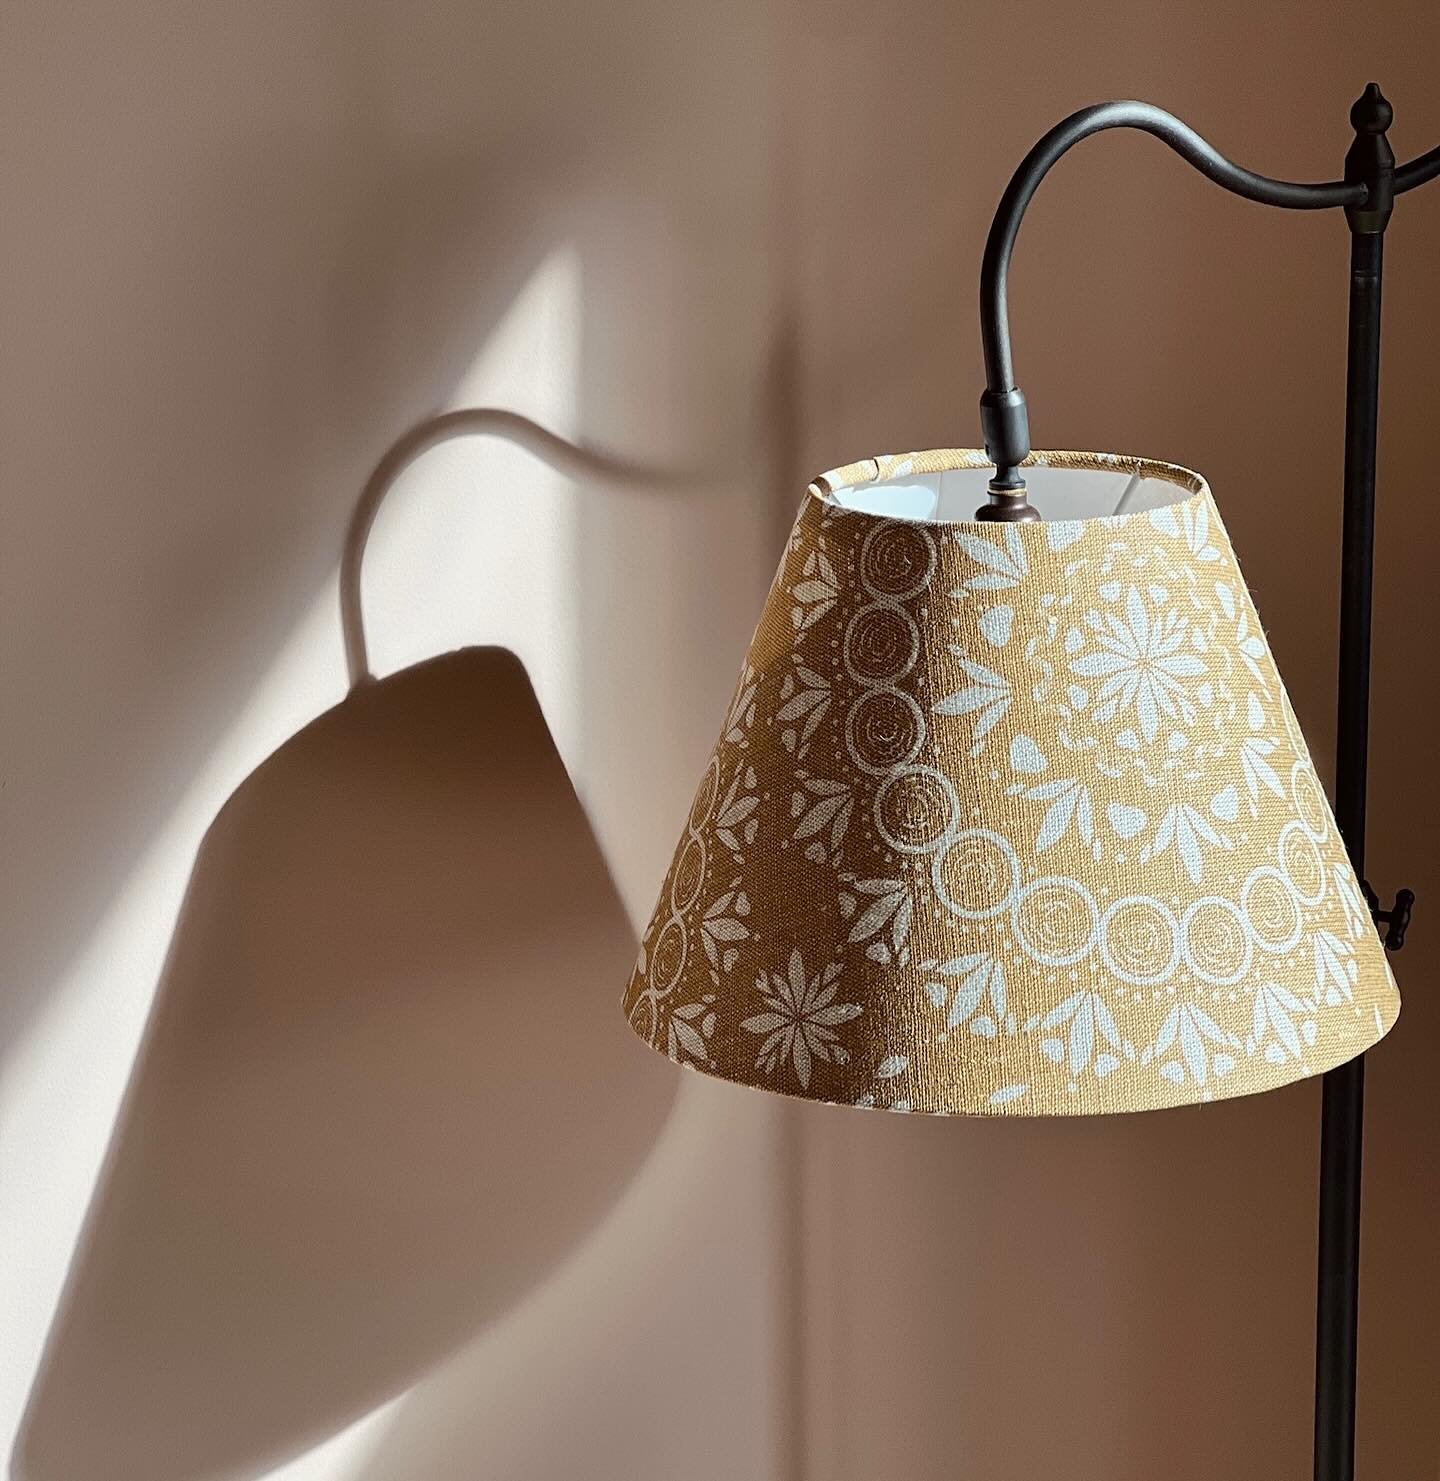 Just add sunshine! ☀️ 

Bringing sunny, warm tones into your home. 

Lampshades: Palma Sol Antique Ochre.  Lamp base by @jimlawrencemade 

Cushions Porto Powder and Antique Ochre and Palma Sol Antique Ochre. 
Sofa upholstered in Ziggy Molinos Toasted